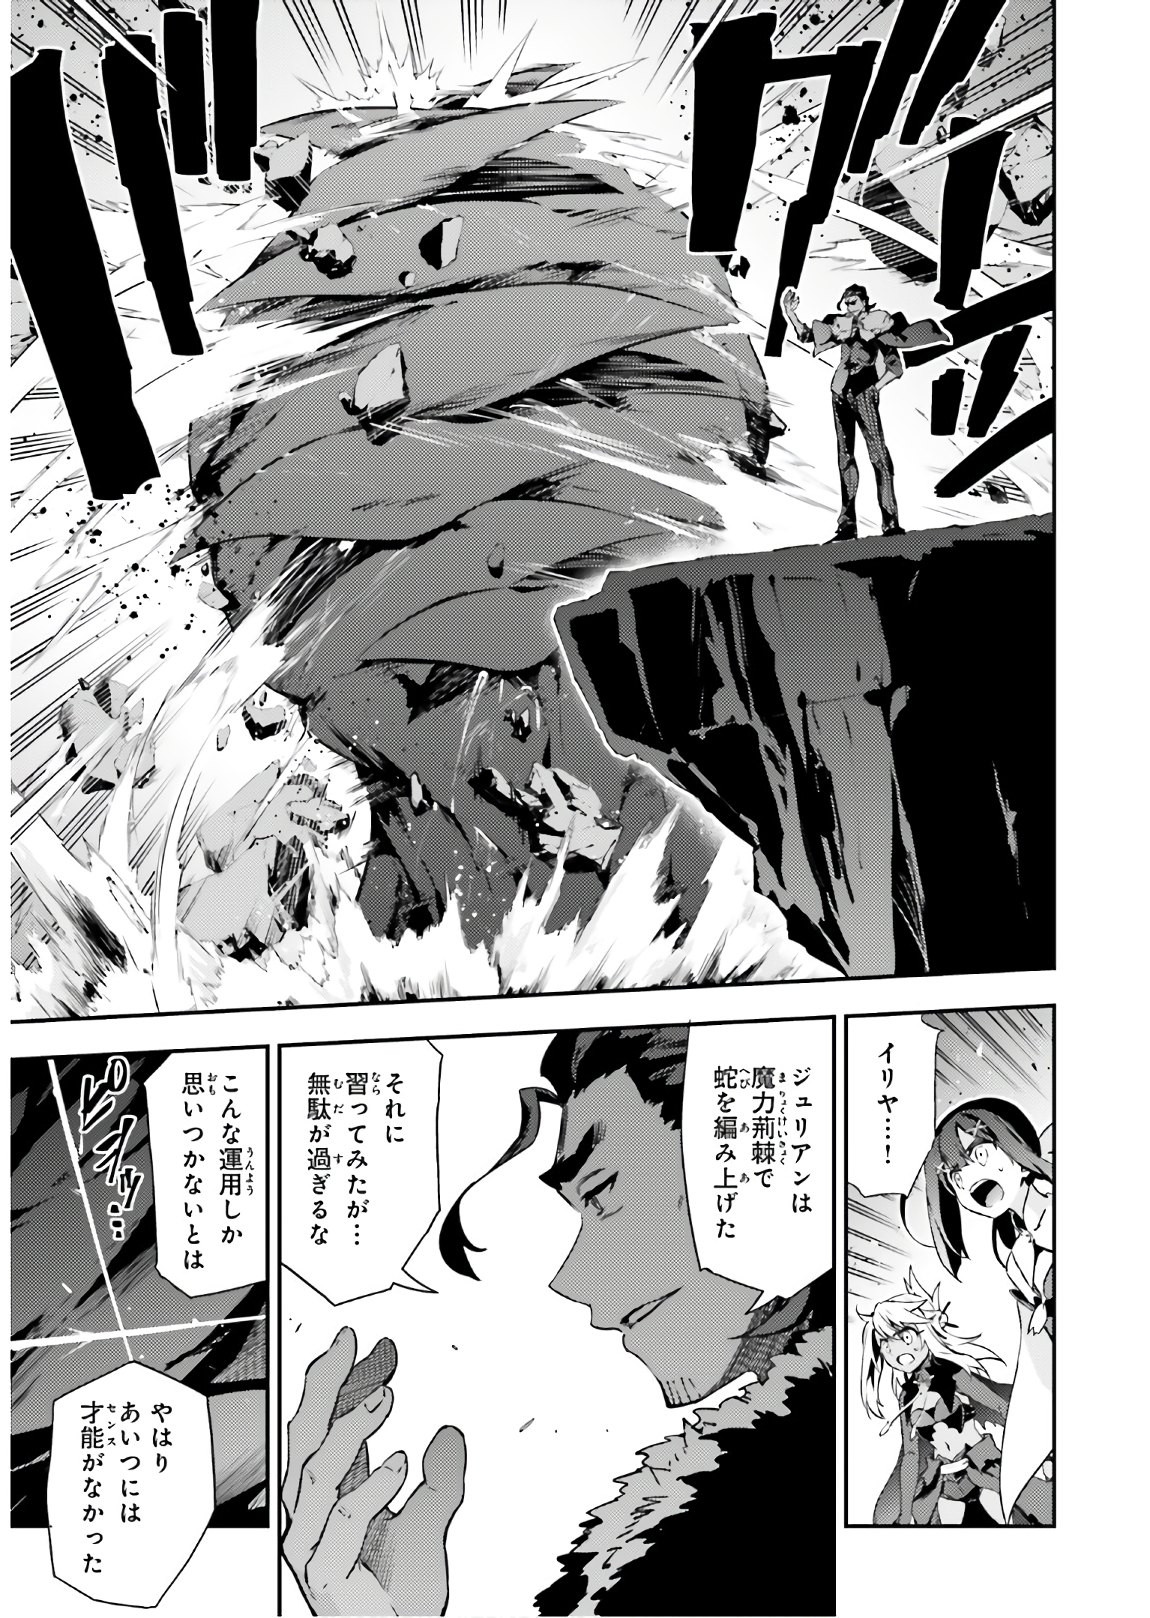 Fate/Kaleid Liner Prisma Illya Drei! - Chapter 58-2 - Page 3